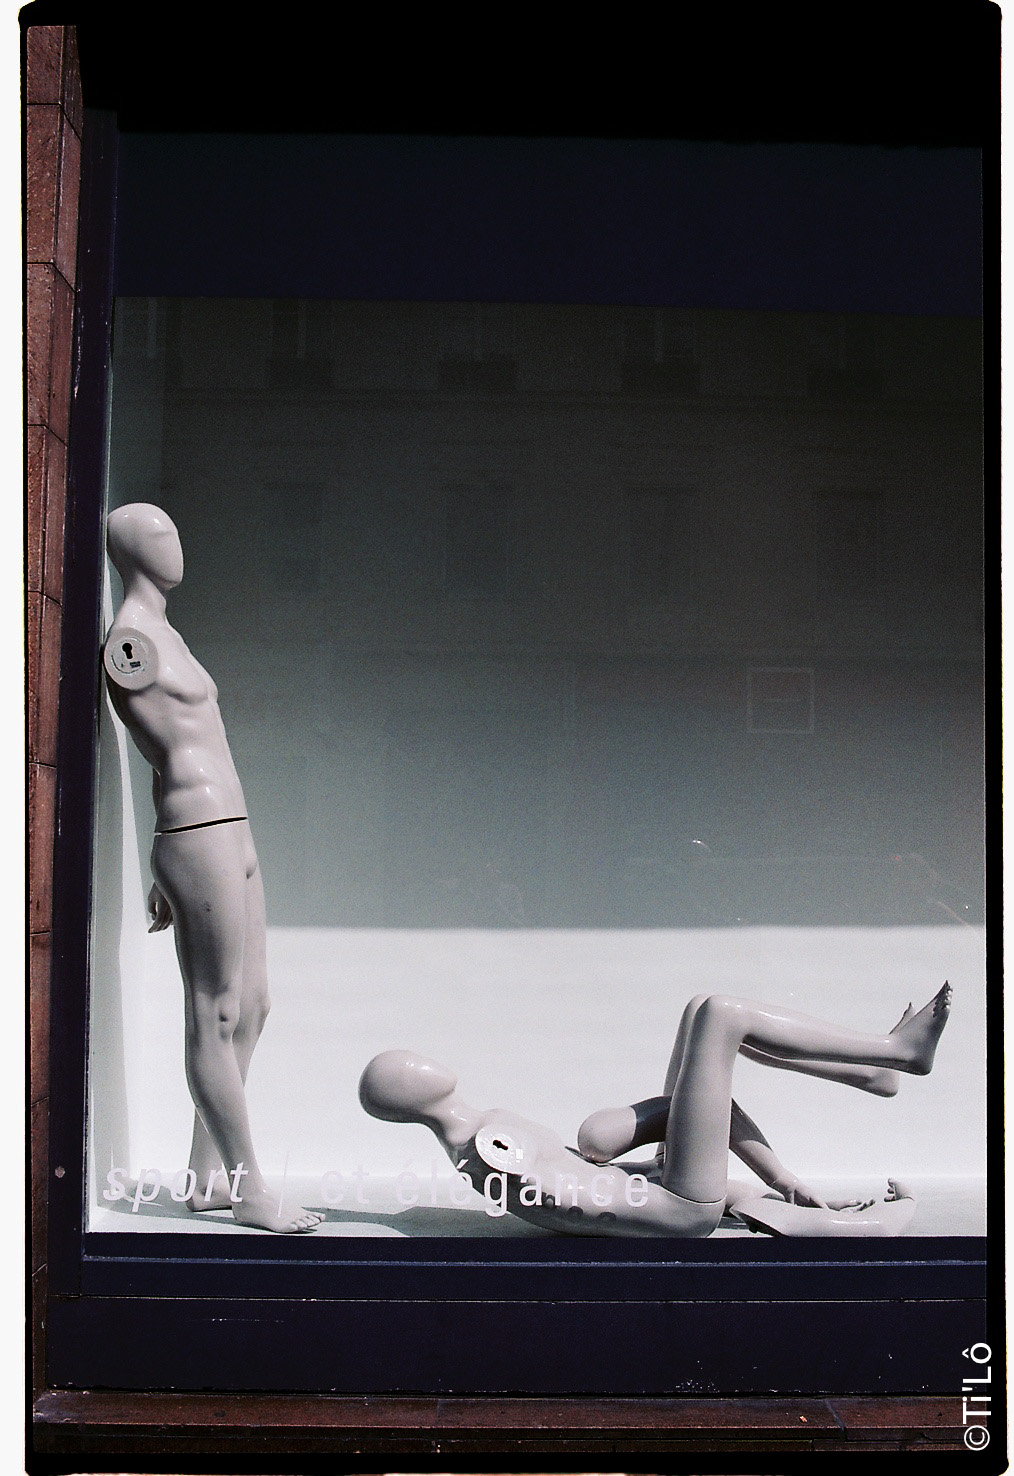 a sculpture displayed with body in window display